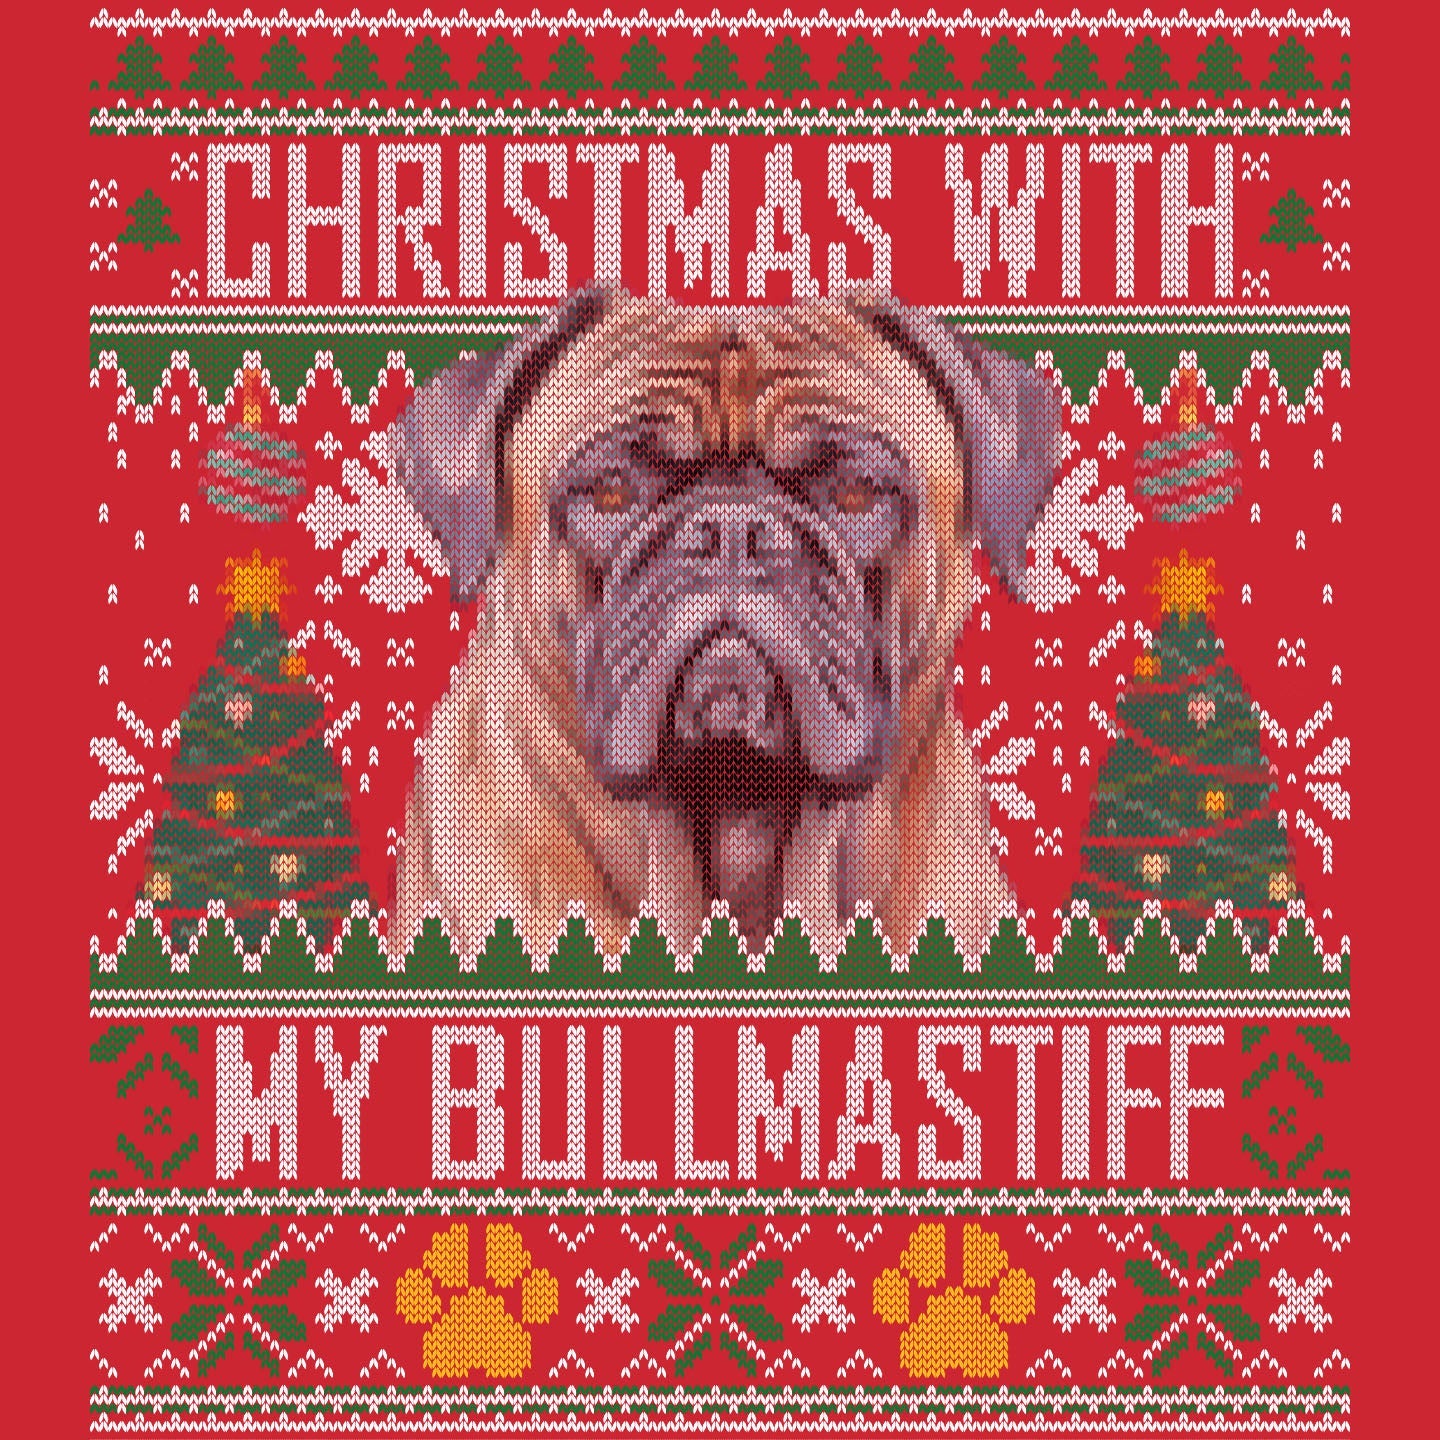 Ugly Sweater Christmas with My Bullmastiff - Adult Unisex Long Sleeve T-Shirt